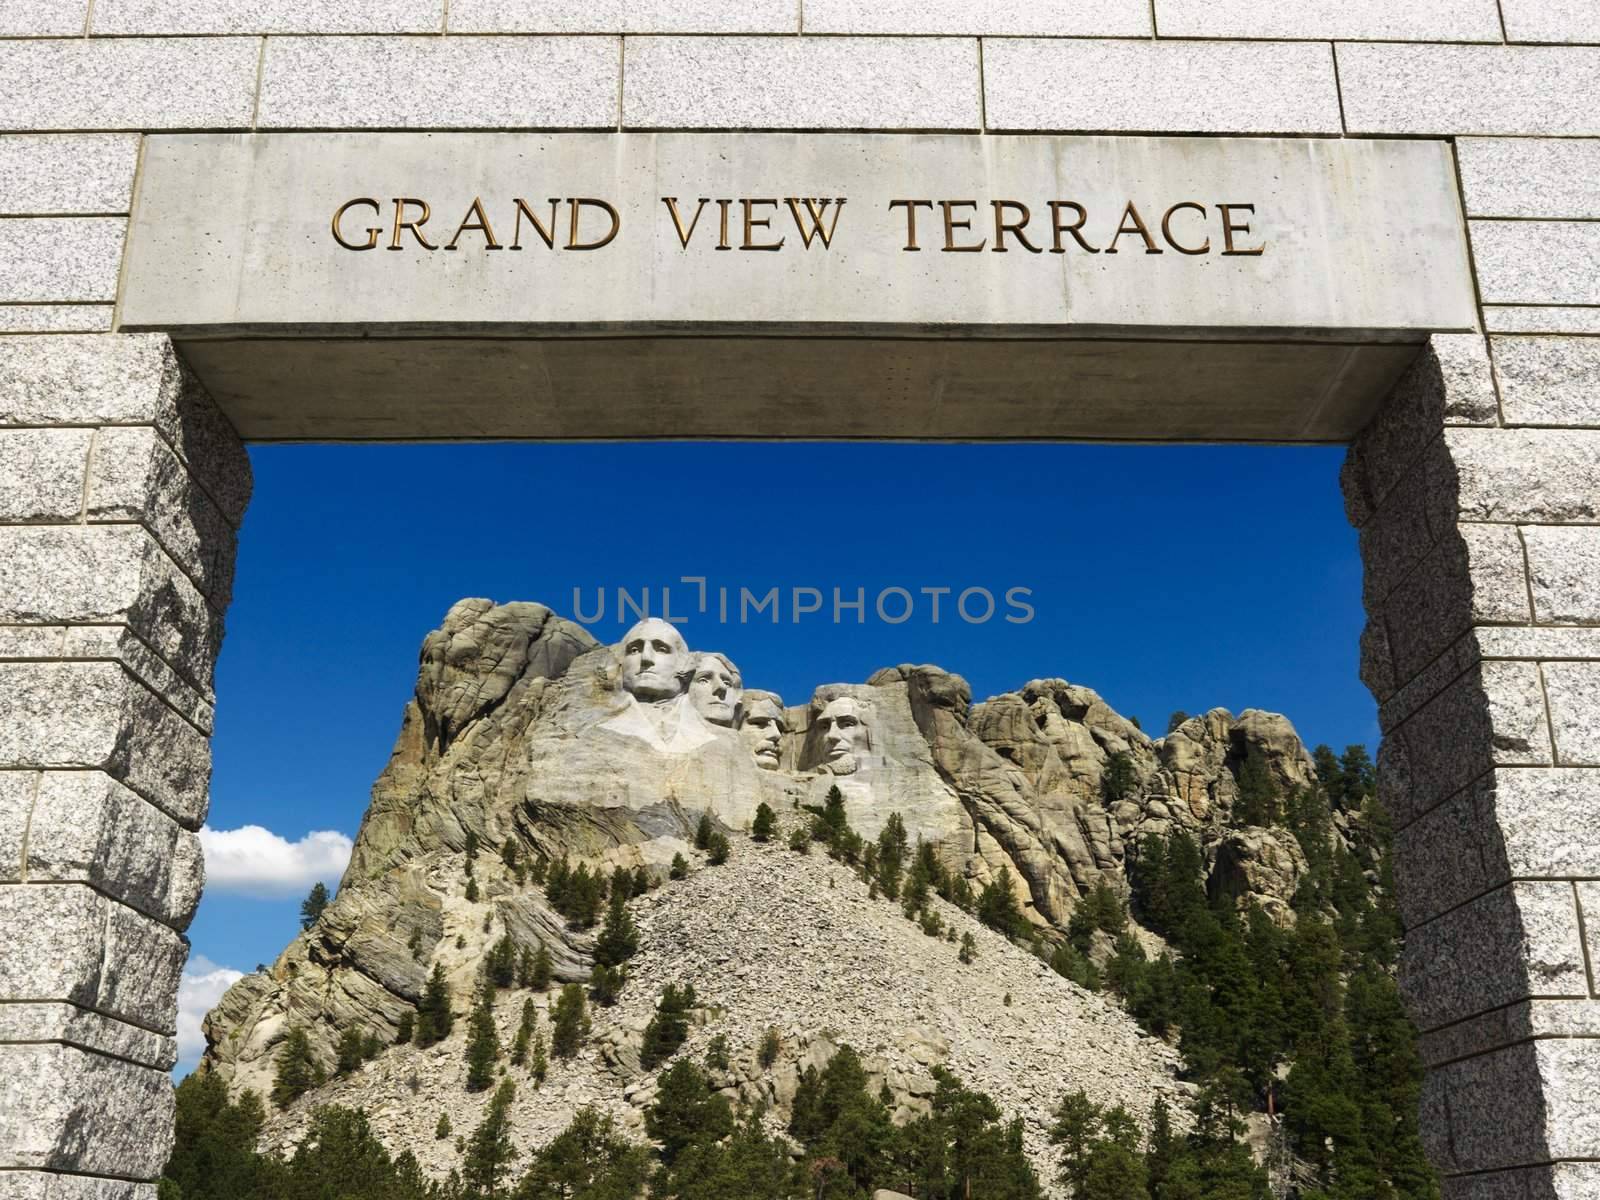 Mount Rushmore entrance. by iofoto